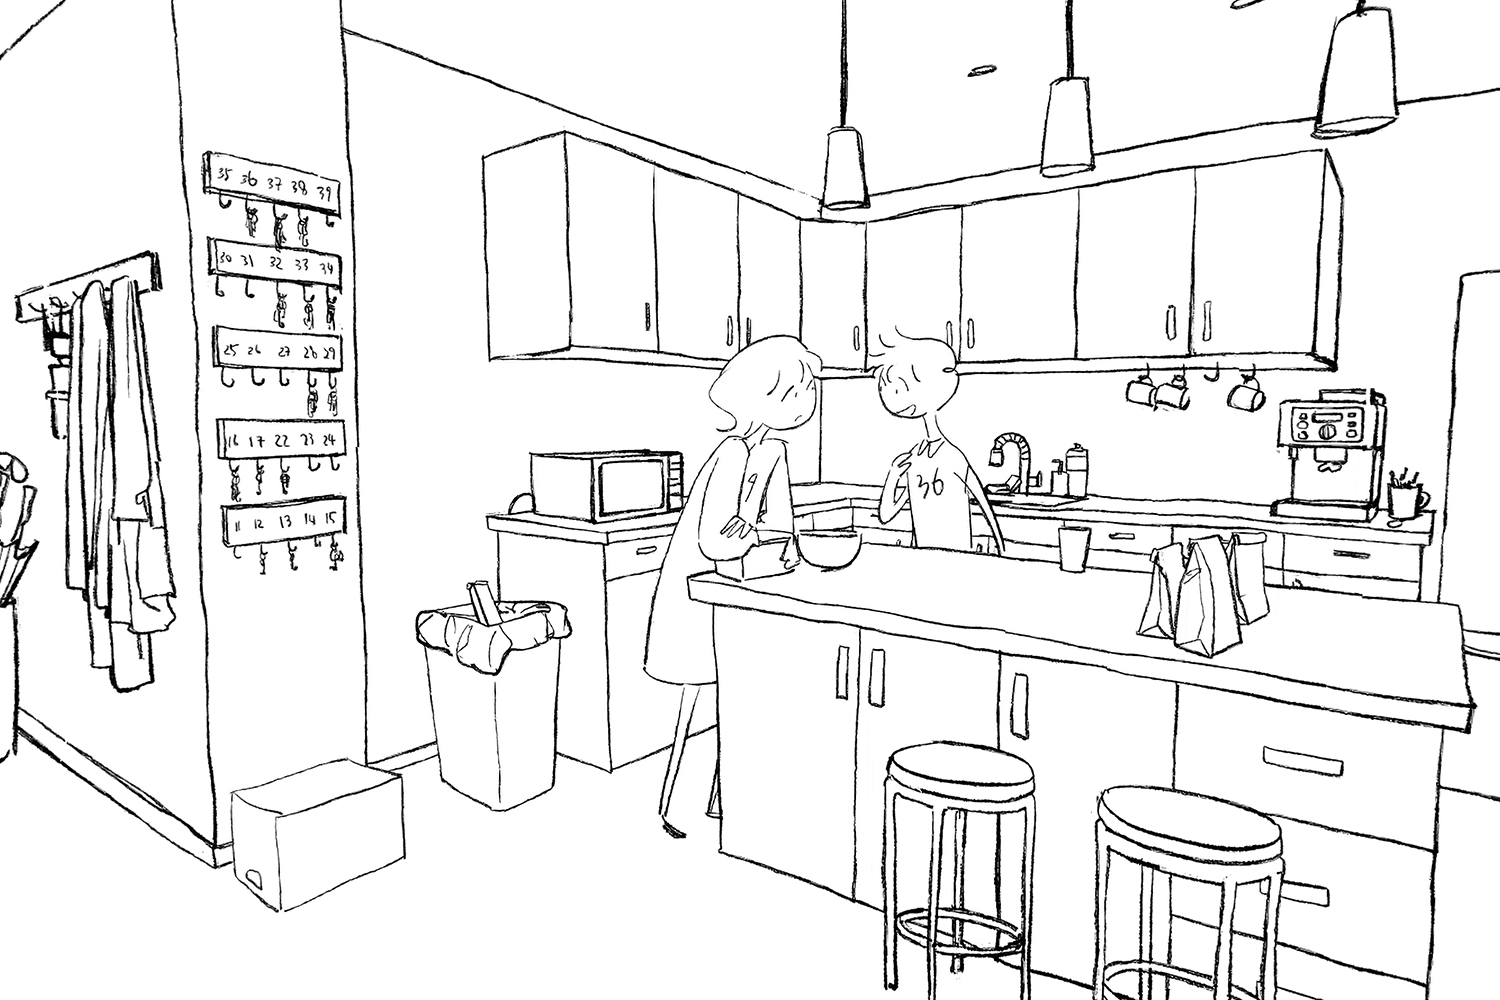 A 2D-animated scene in a kitchen.